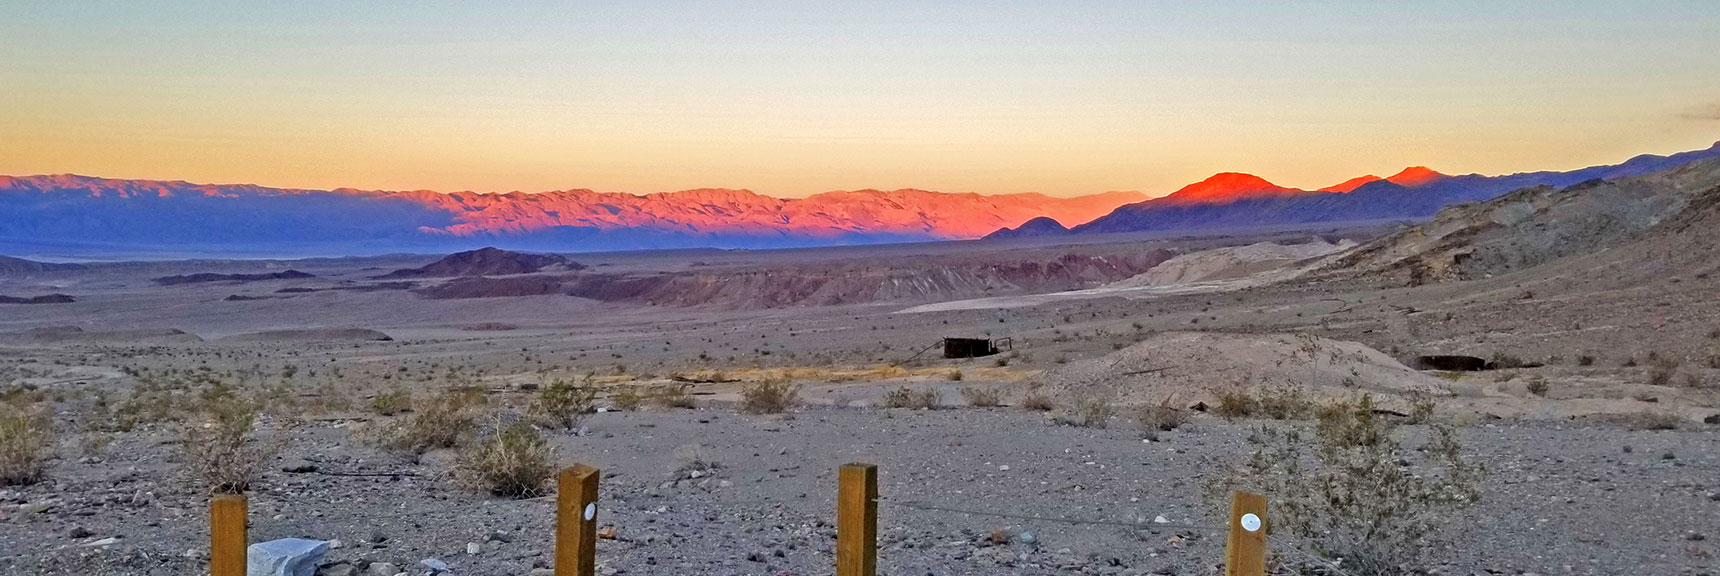 Sunrise Over Northern Death Valley from Keane Wonder Mine Parking Area | Keane Wonder Mine | Death Valley National Park, California